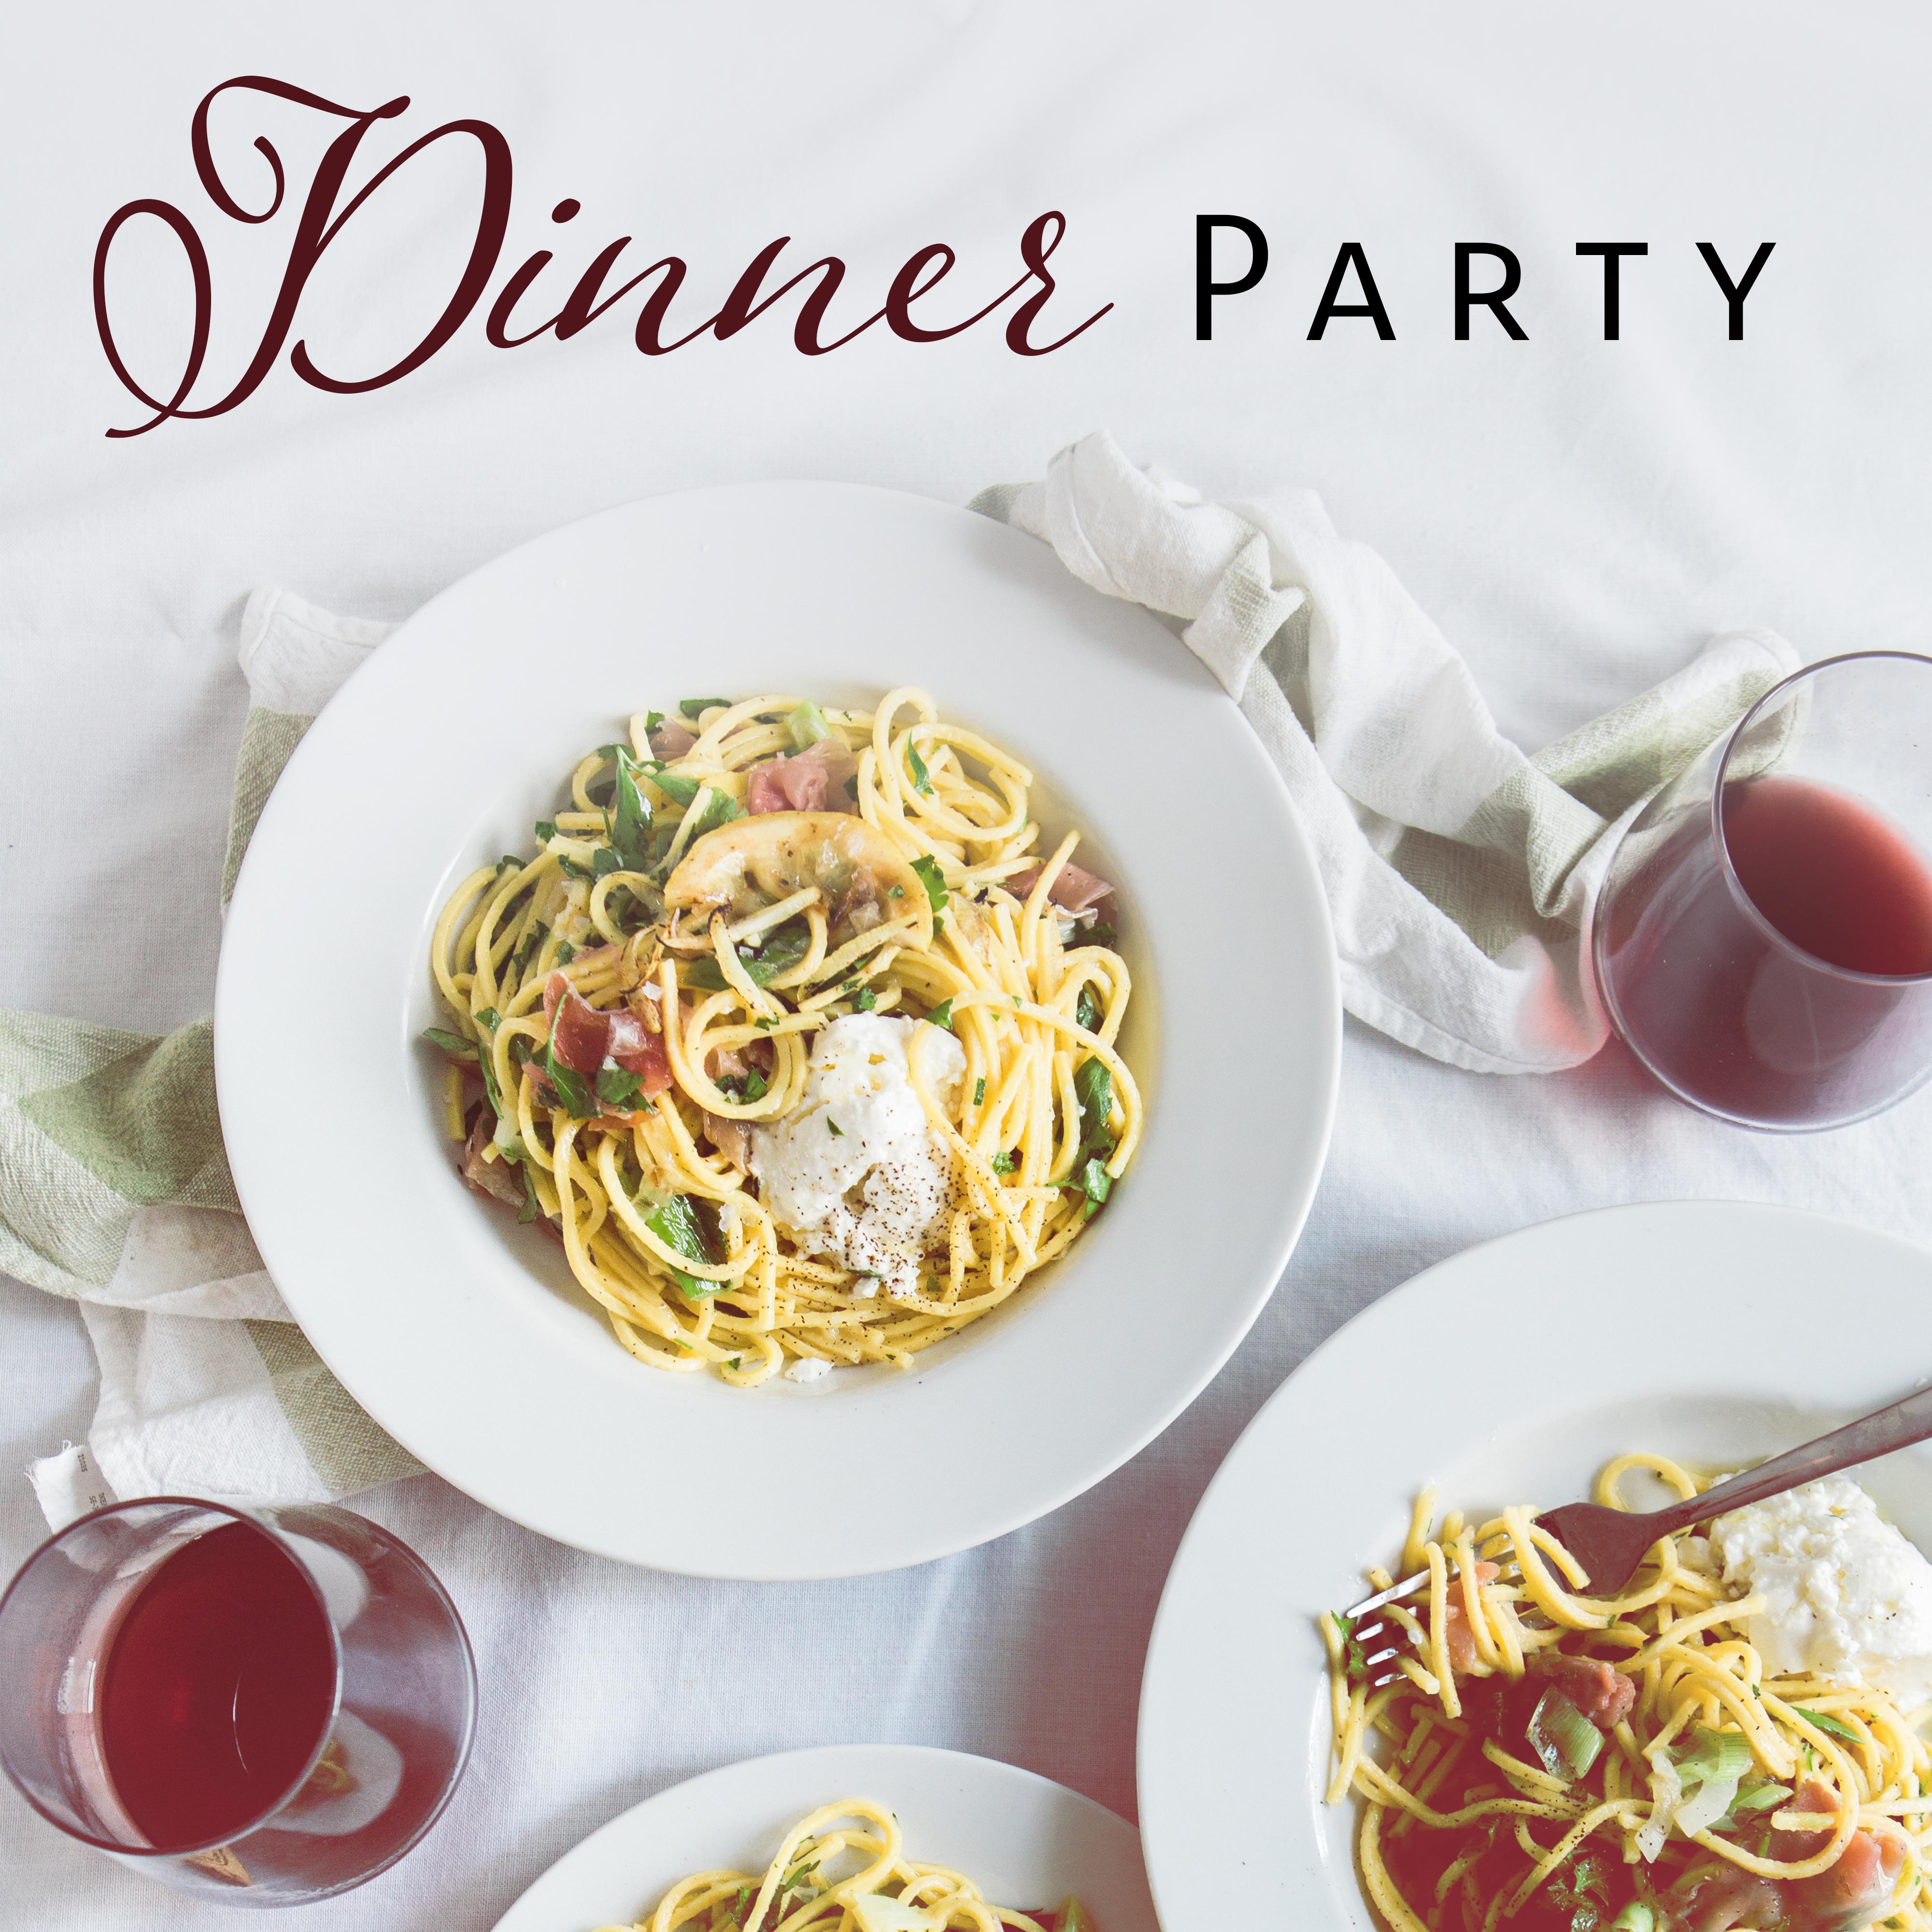 Dinner Party  Relaxing Songs for Restaurant, Jazz Cafe, Instrumental Jazz Music, Chilled Time, Calm Down